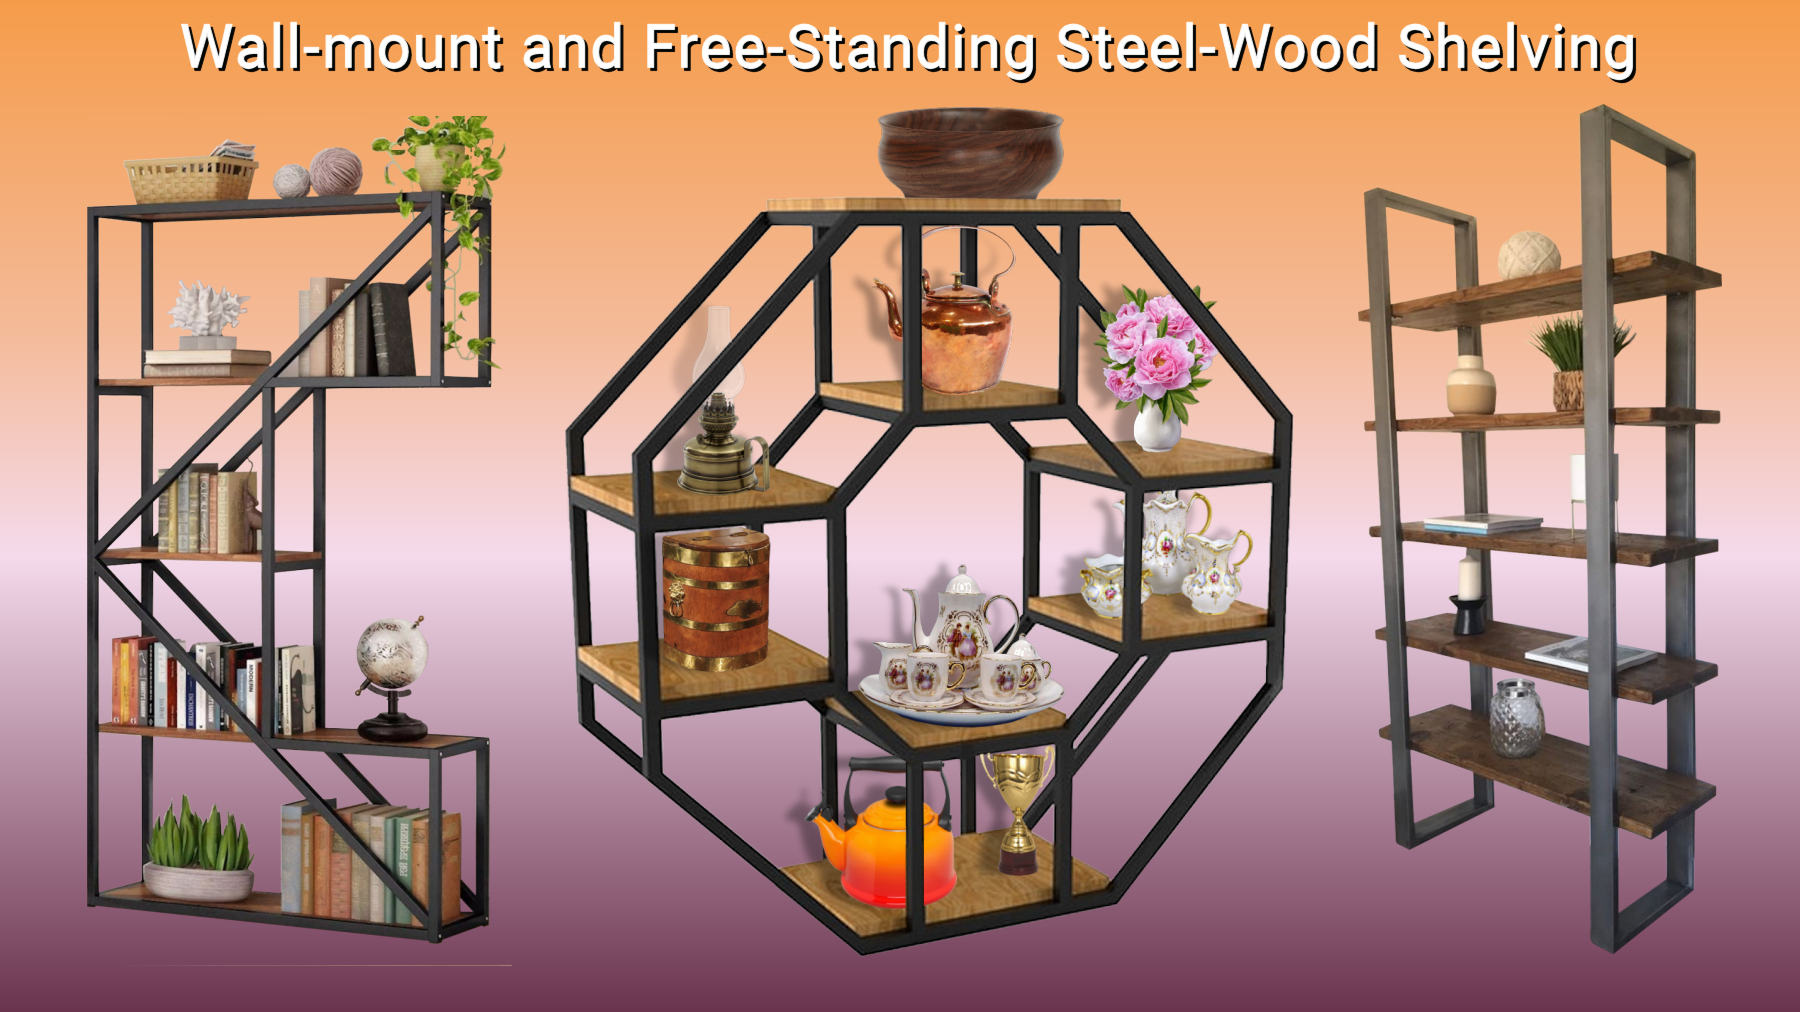 Wall-mount and Free-Standing Steel-Wood Shelving